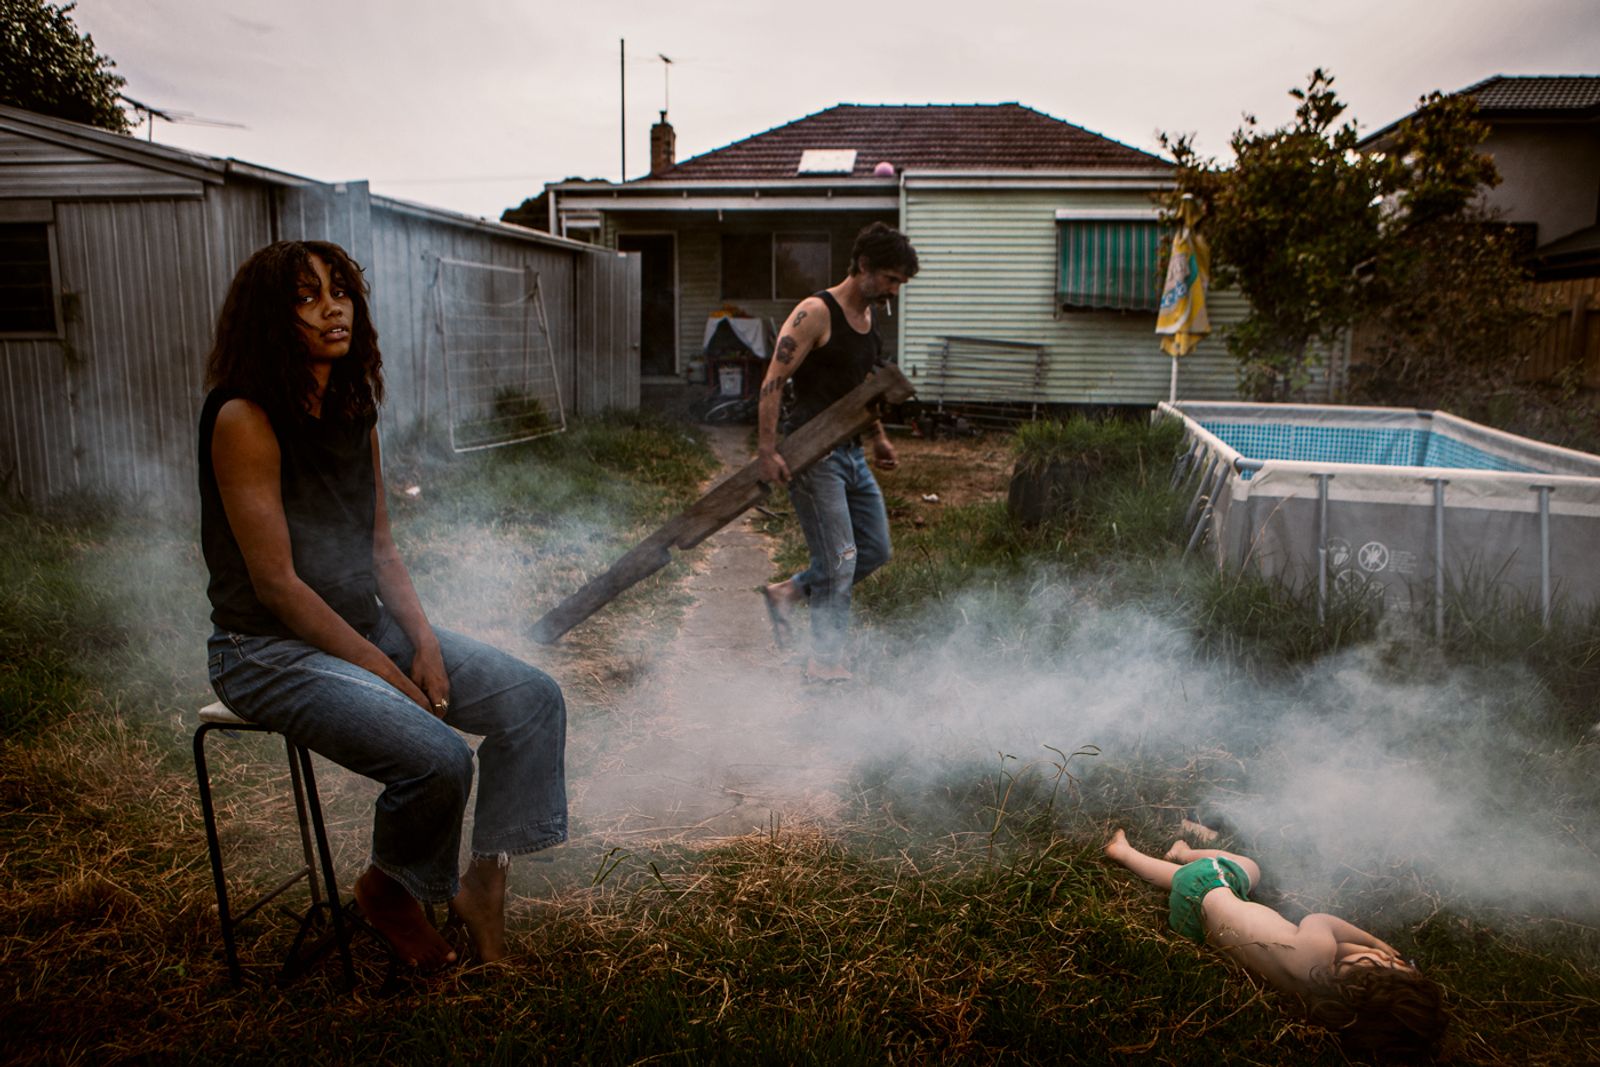 © Tajette O'halloran - Image from the In Australia photography project